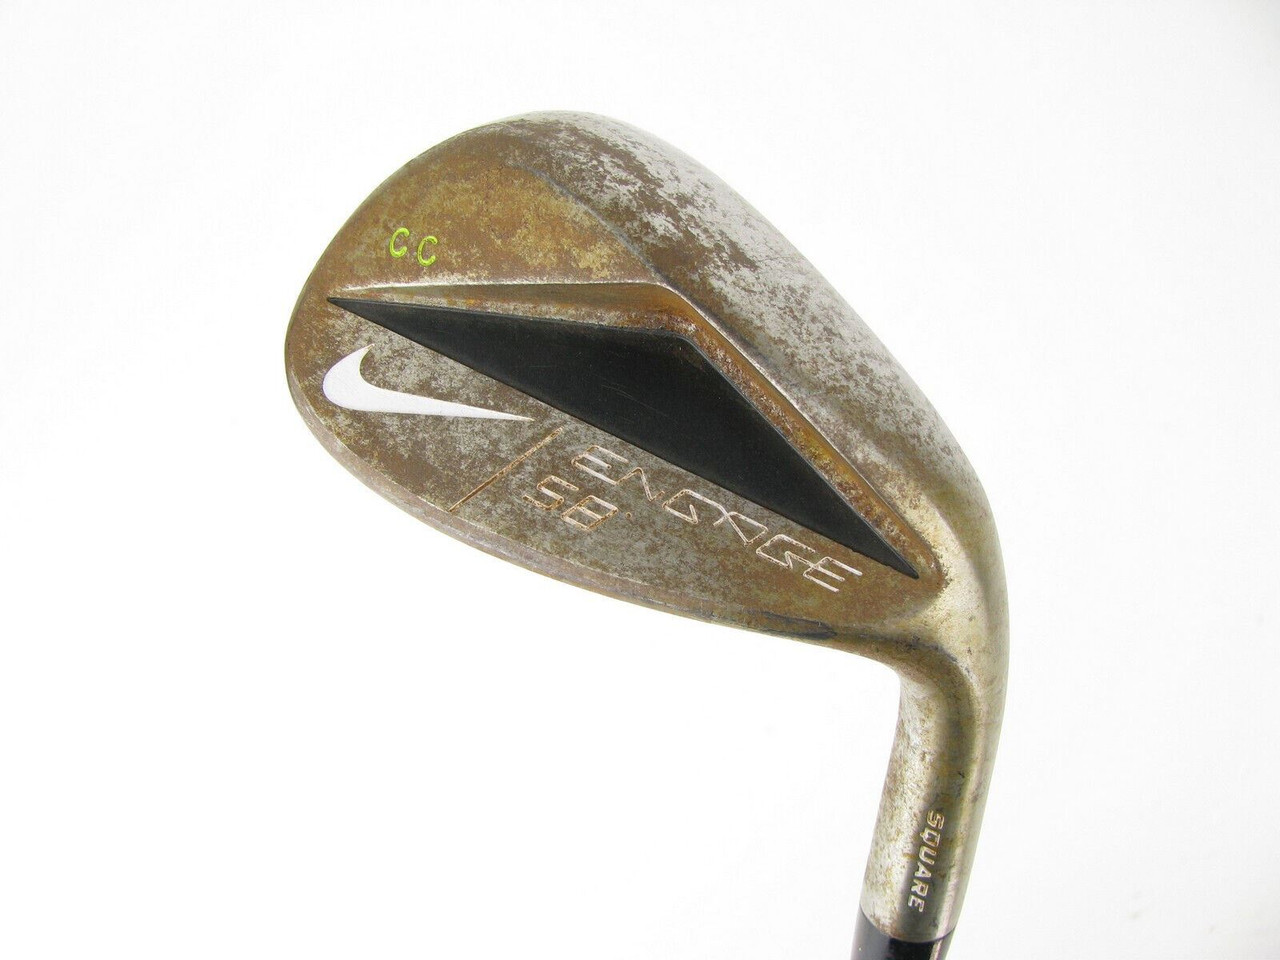 Nike Engage Square Sole Lob Wedge 58 degree with Steel Dynamic Gold Spinner  - Clubs n Covers Golf